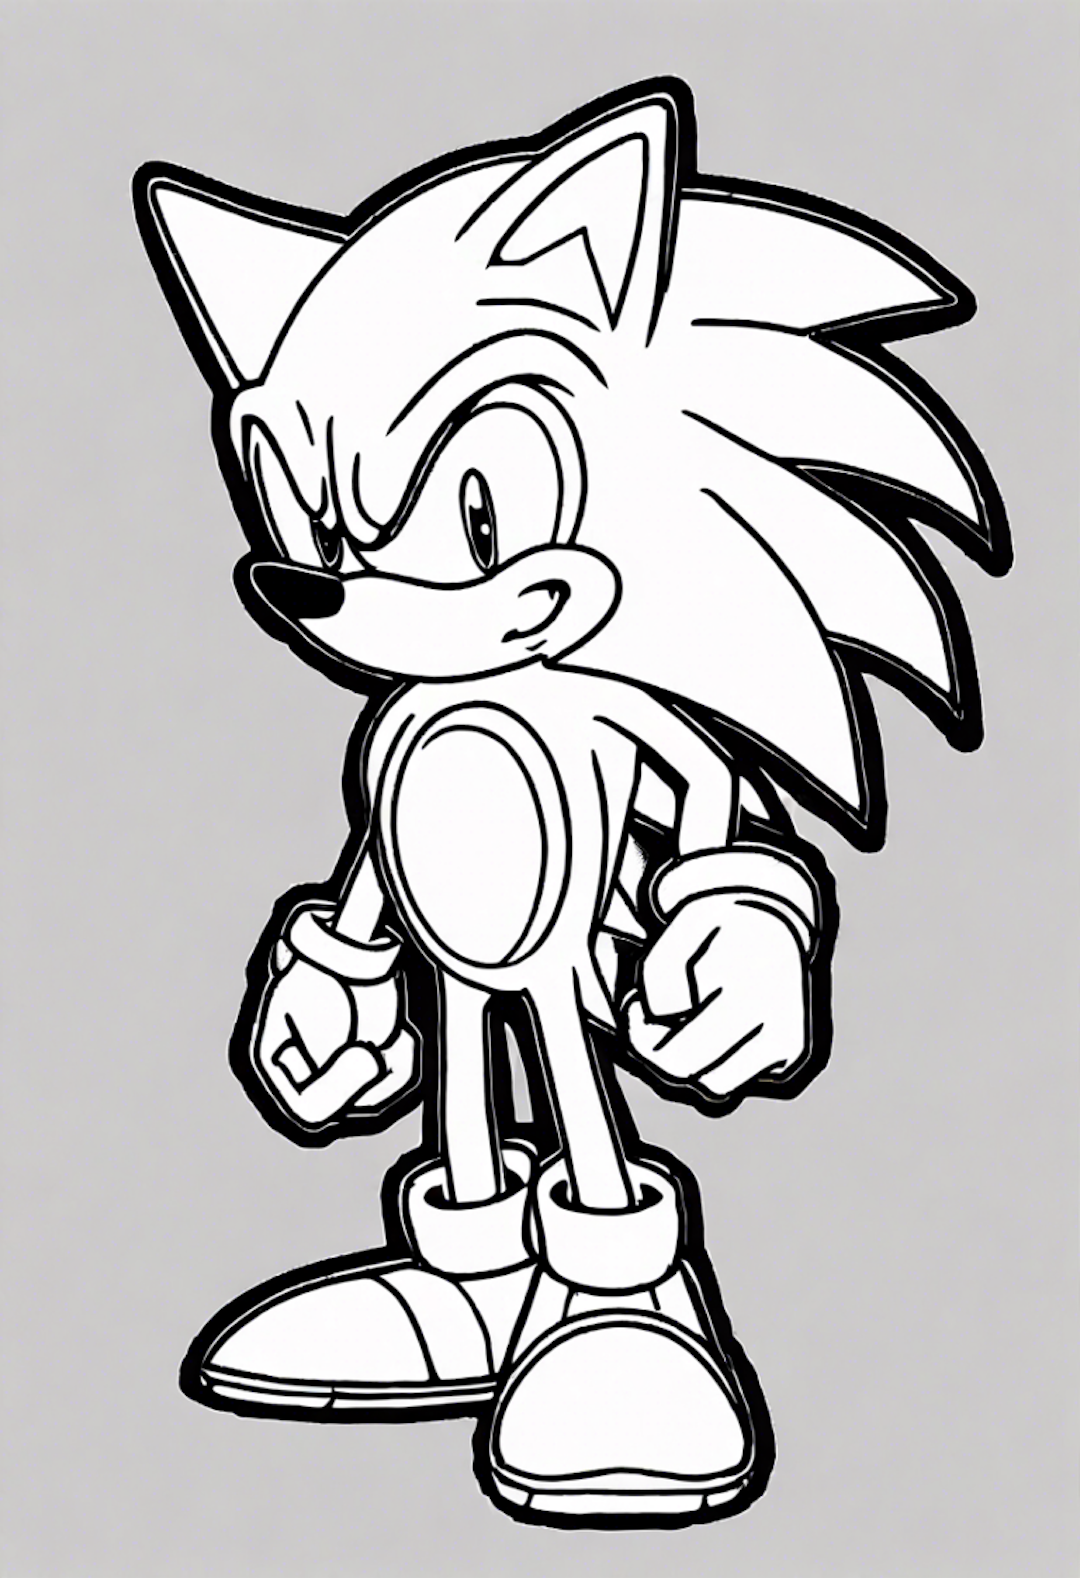 Sonic the Hedgehog Coloring Adventure coloring pages